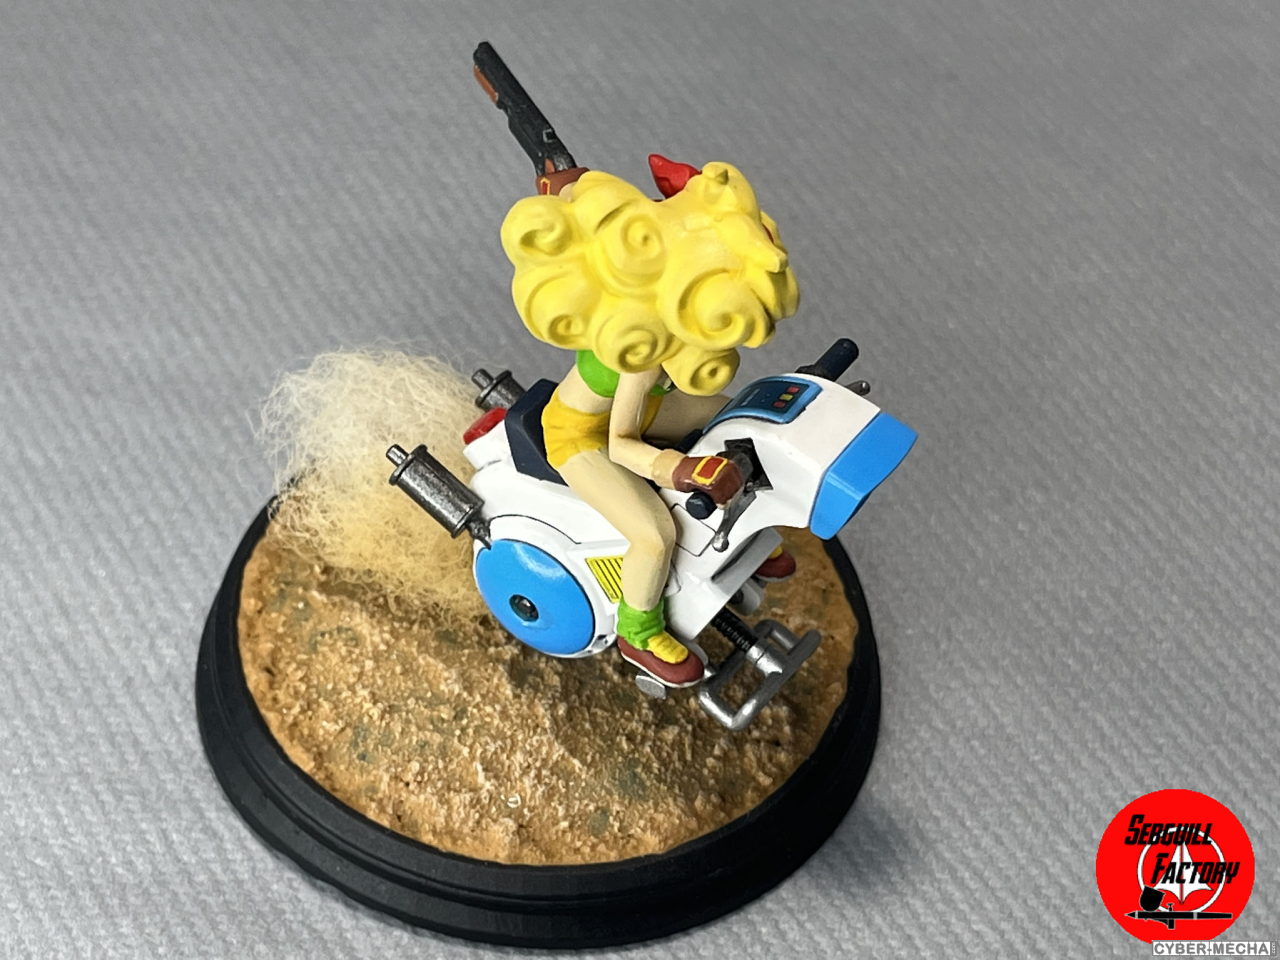 Dragon ball mecha collection 3 Lunch’s one wheel motorcycle 1678634542